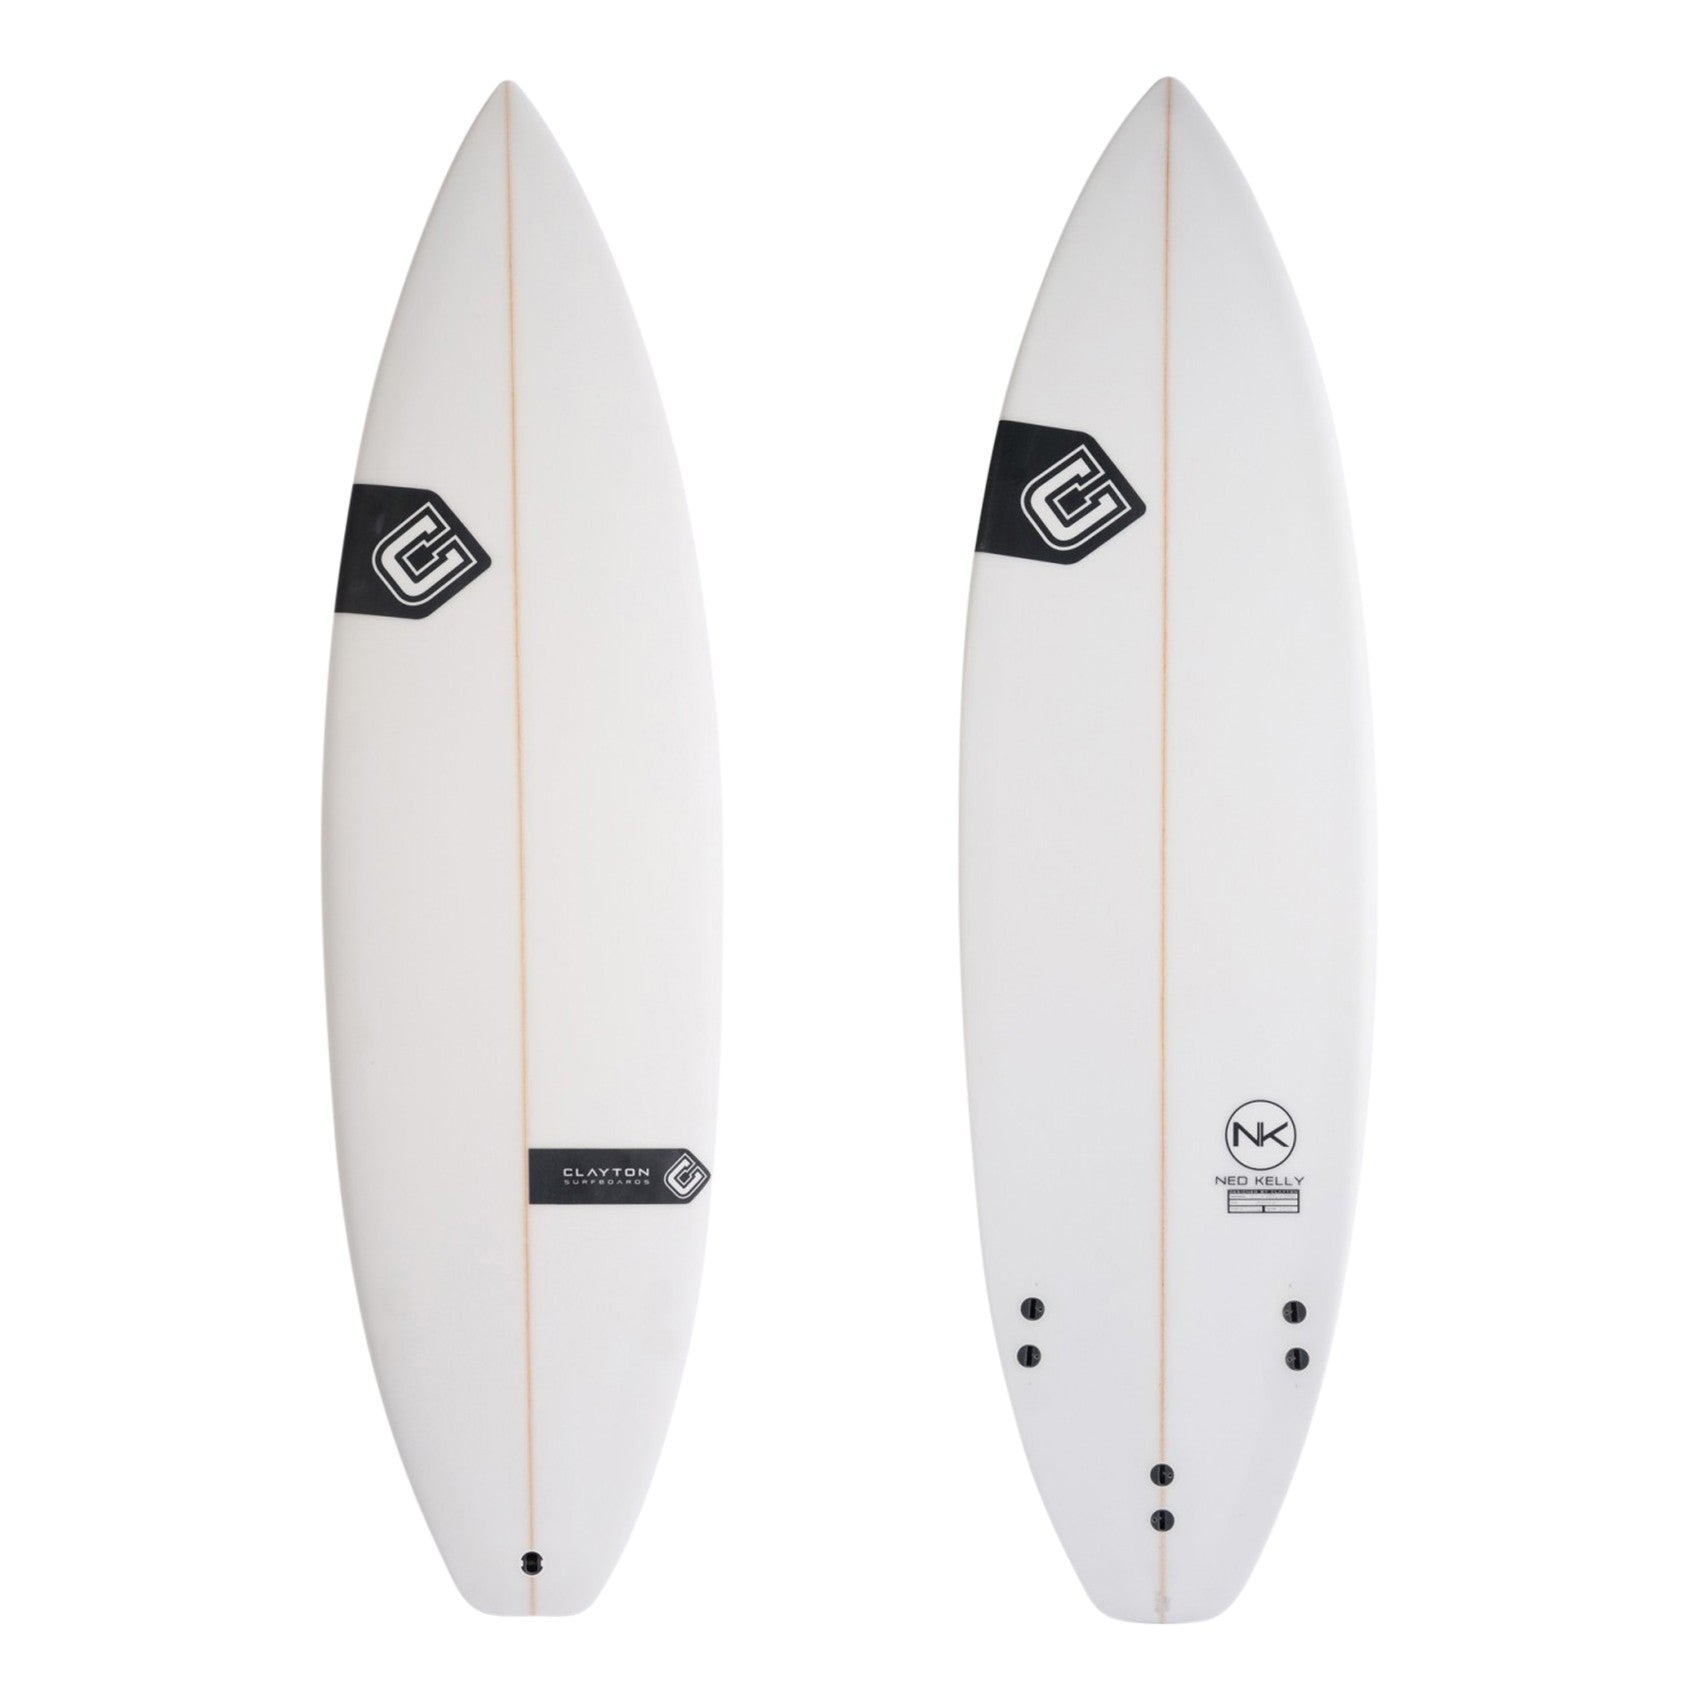 CLAYTON Surfboards - Ned Kelly (PU) FCS - 5'8